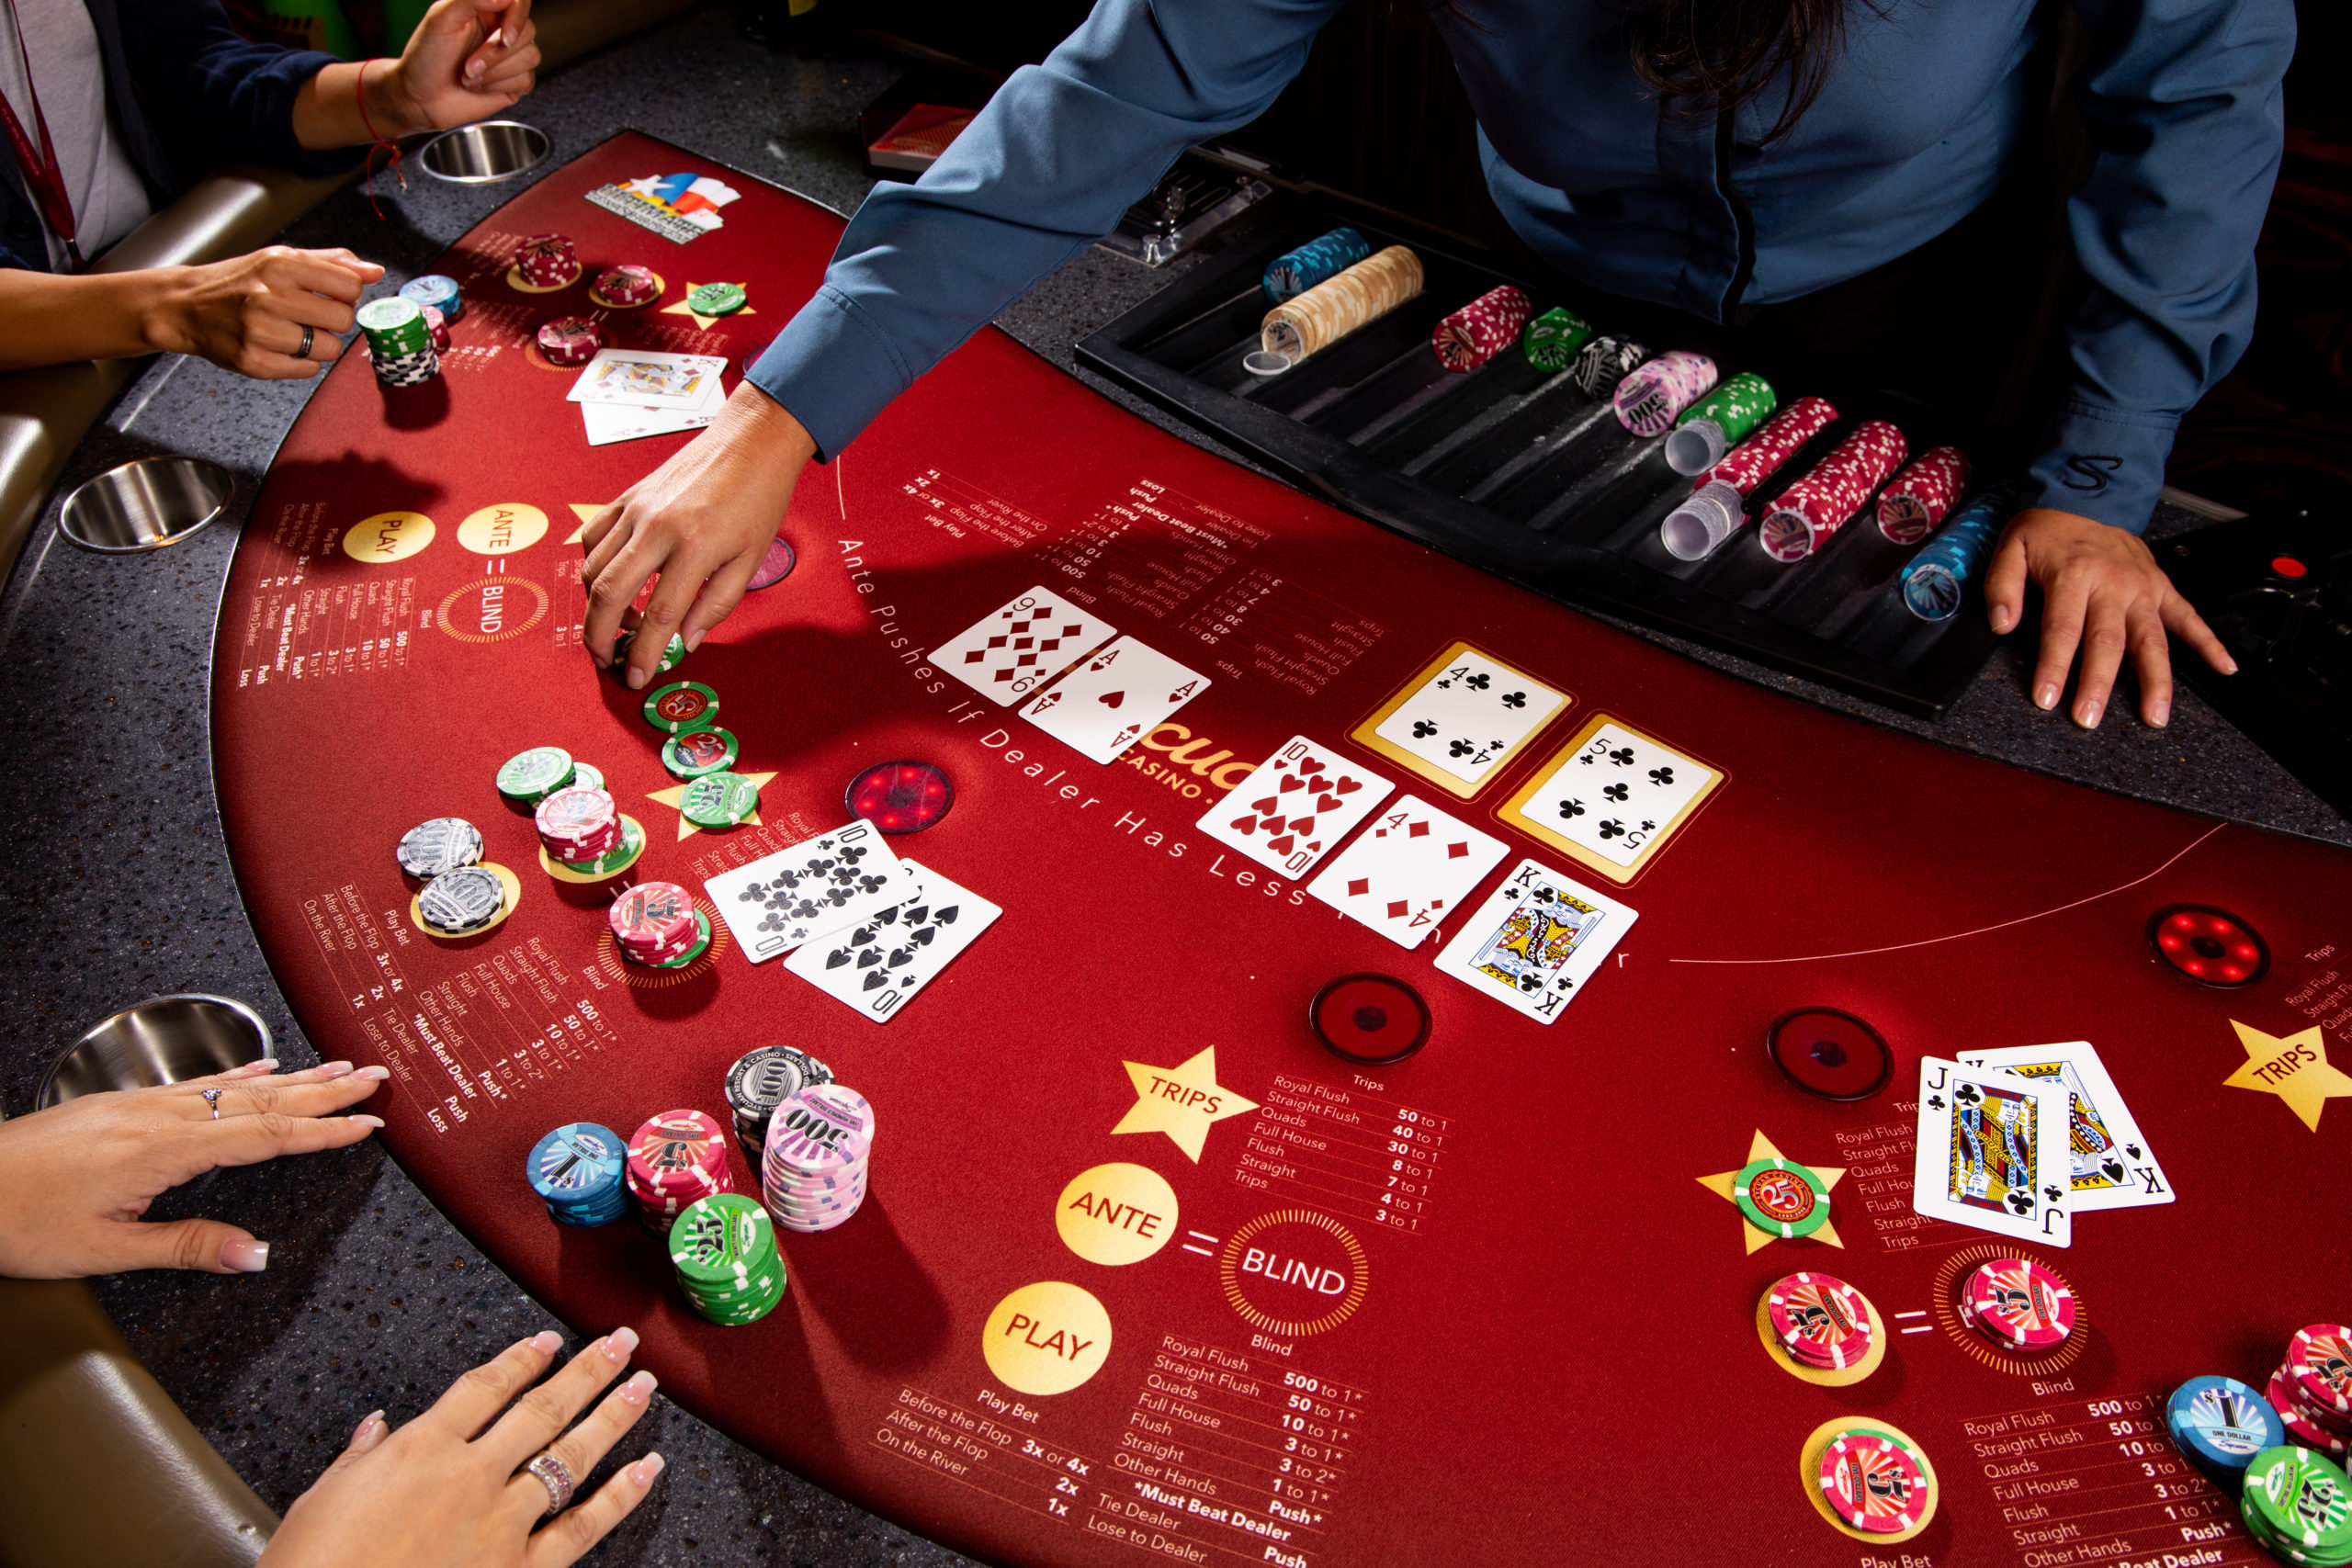 What is a Poker game, and how do you play it